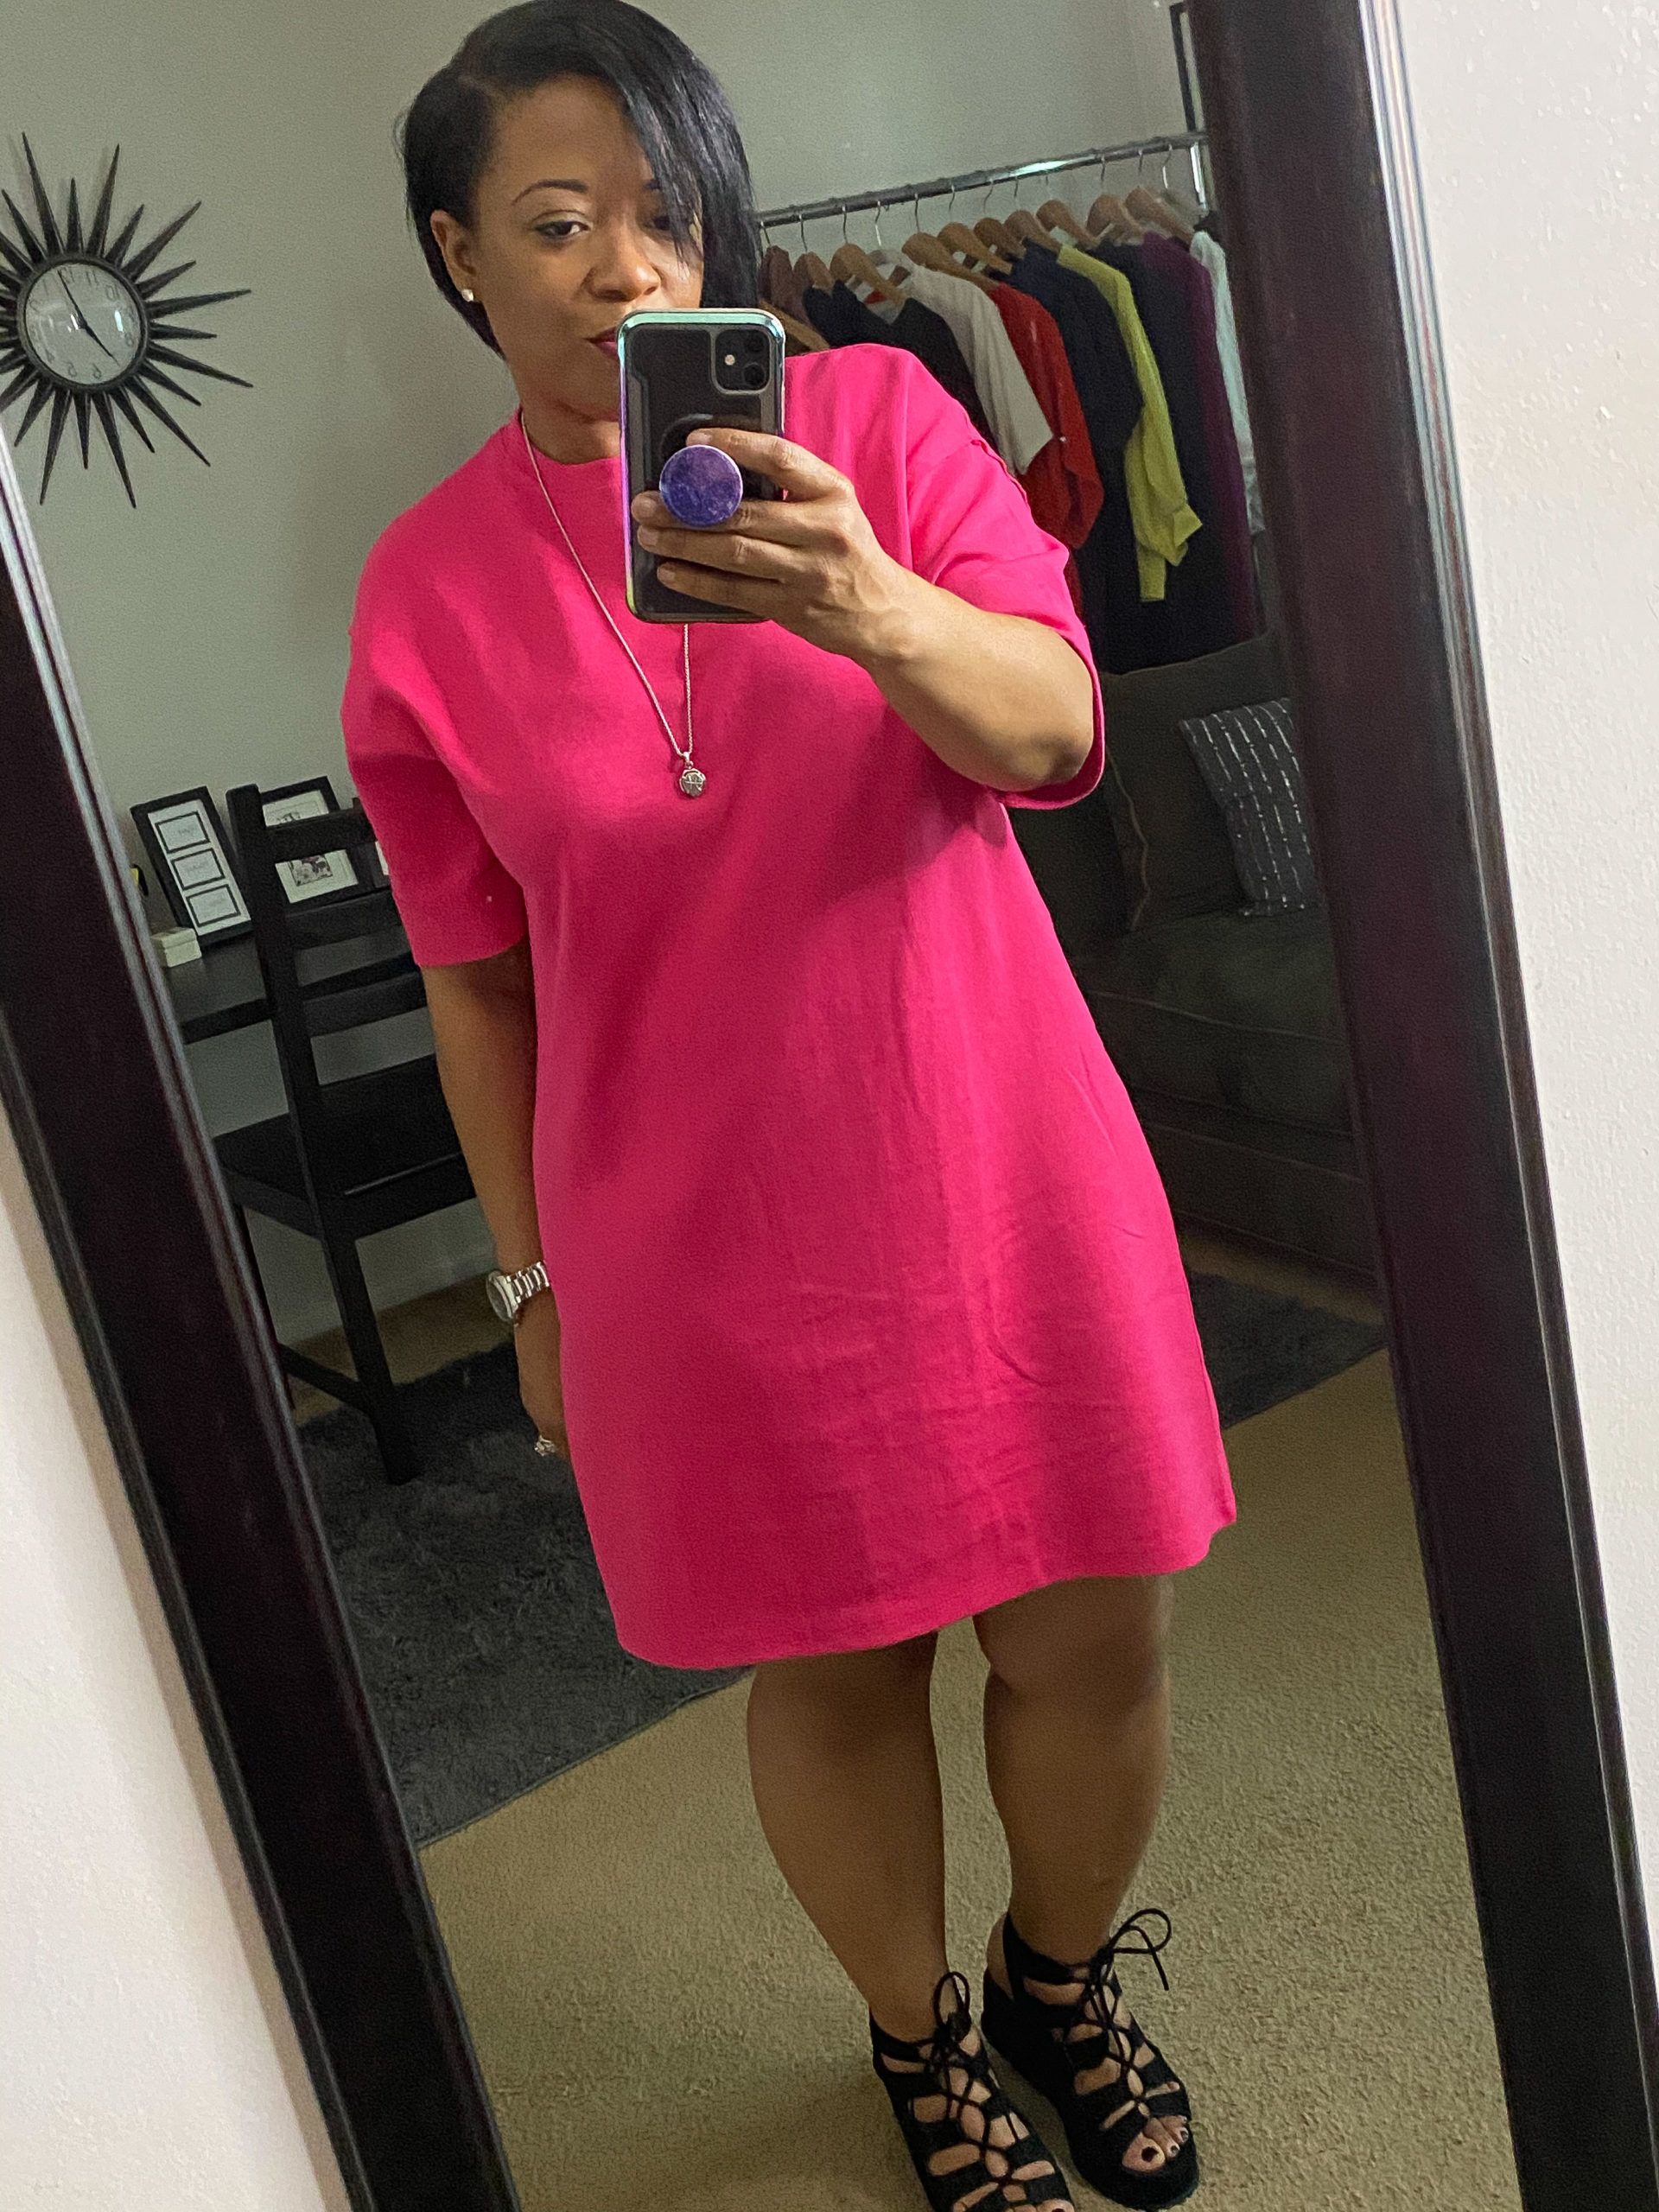 Style and Image Consultant, Robin Fisher wearing a bold colored hot pink T-shirt dress with black sandals.